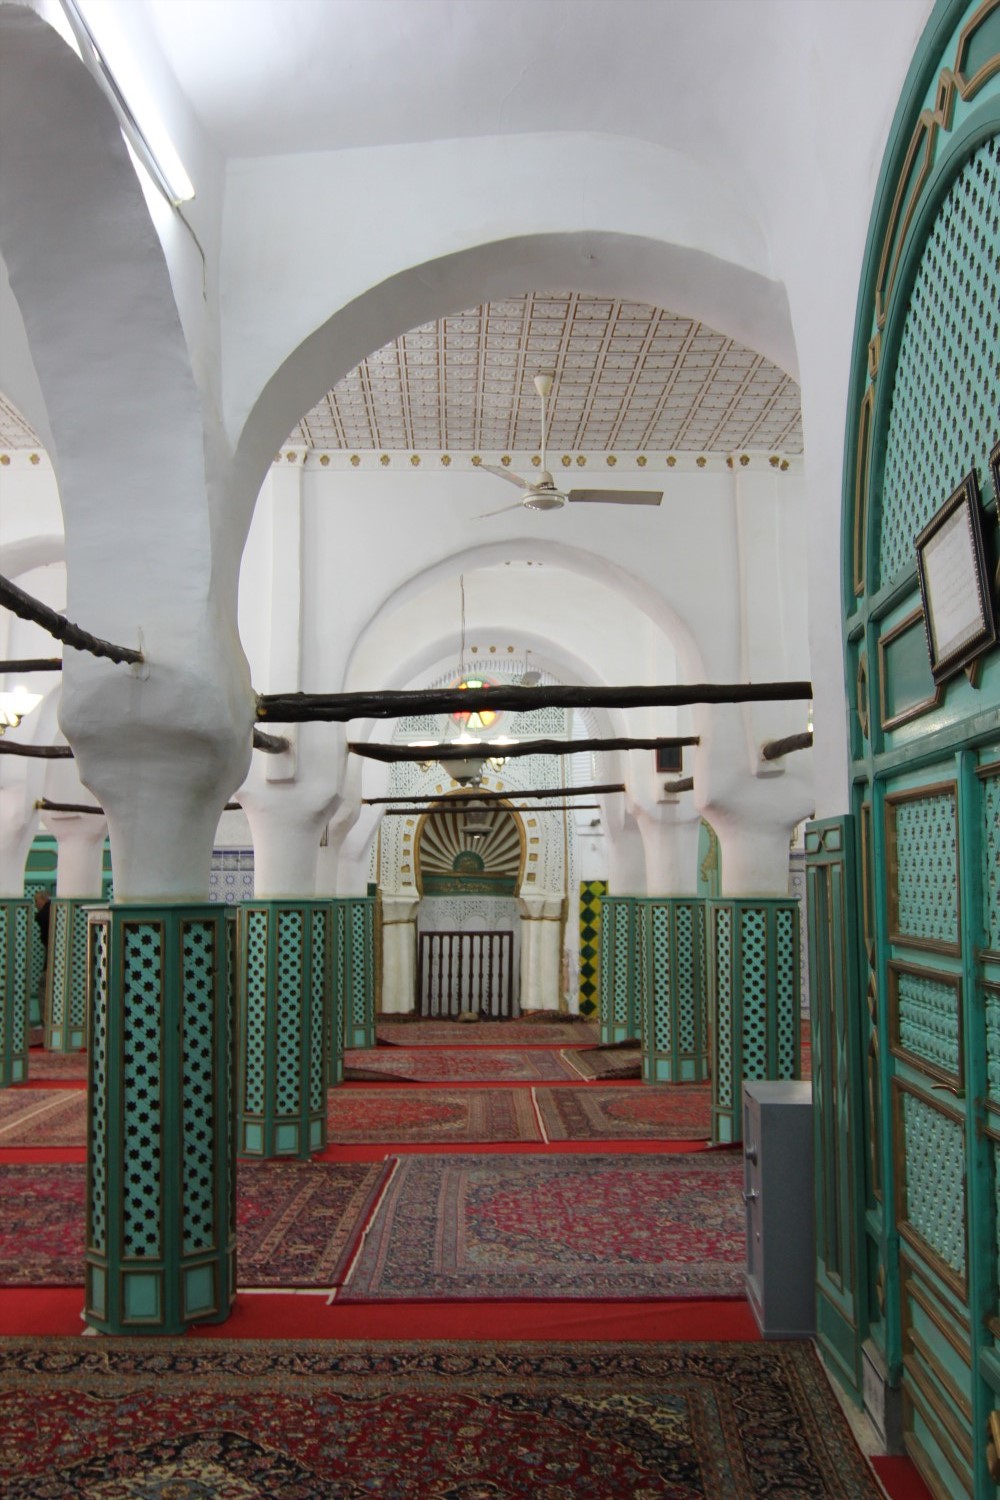 View of the prayer hall showing the mihrab in the background